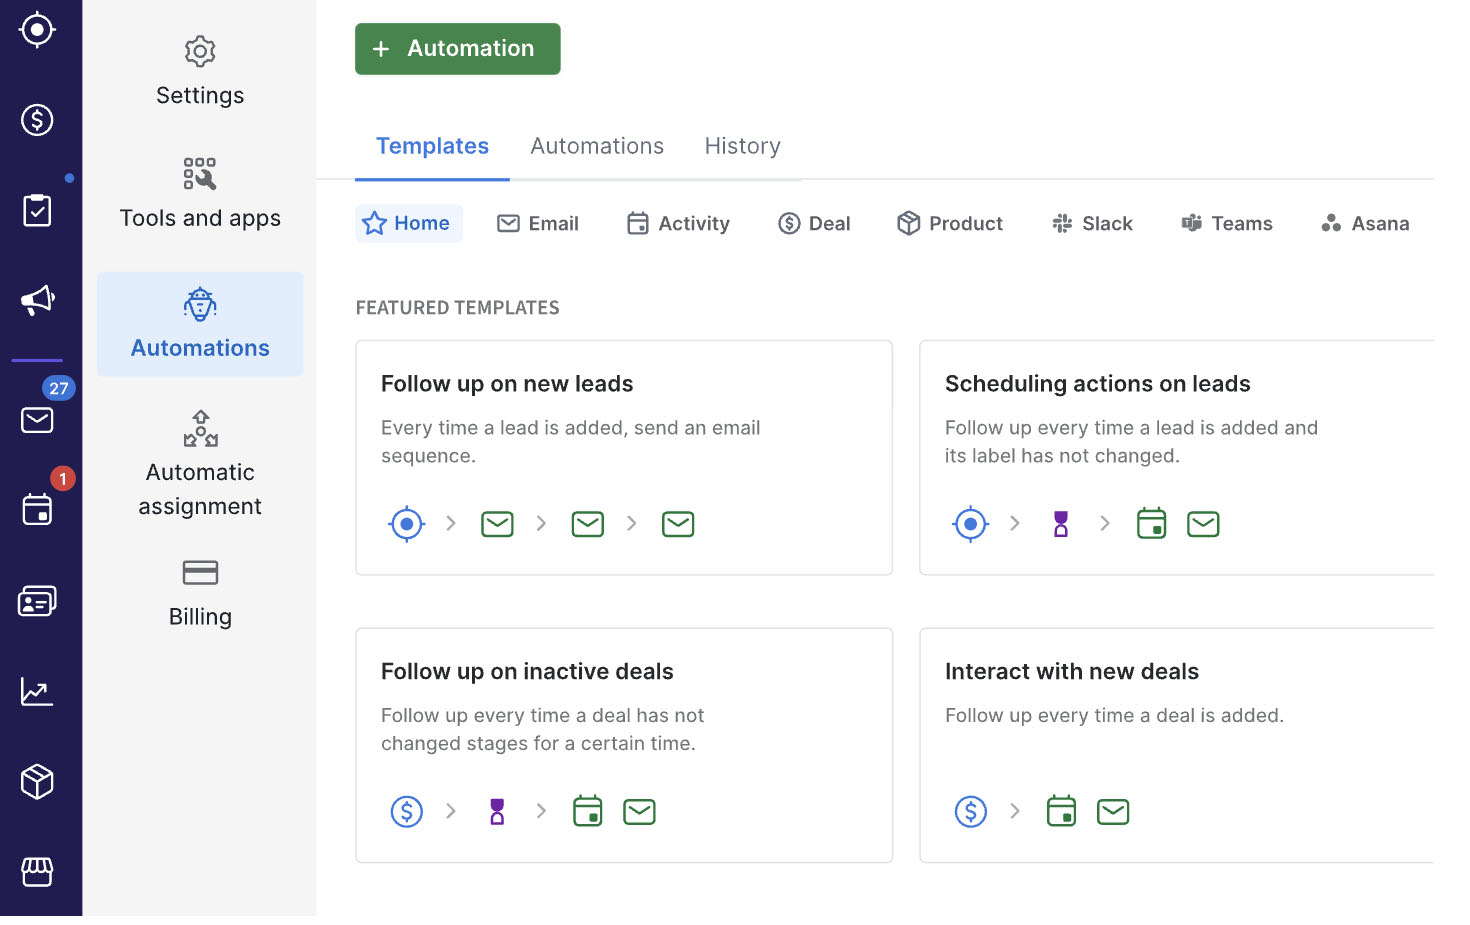 Sales automation templates on Pipedrive.